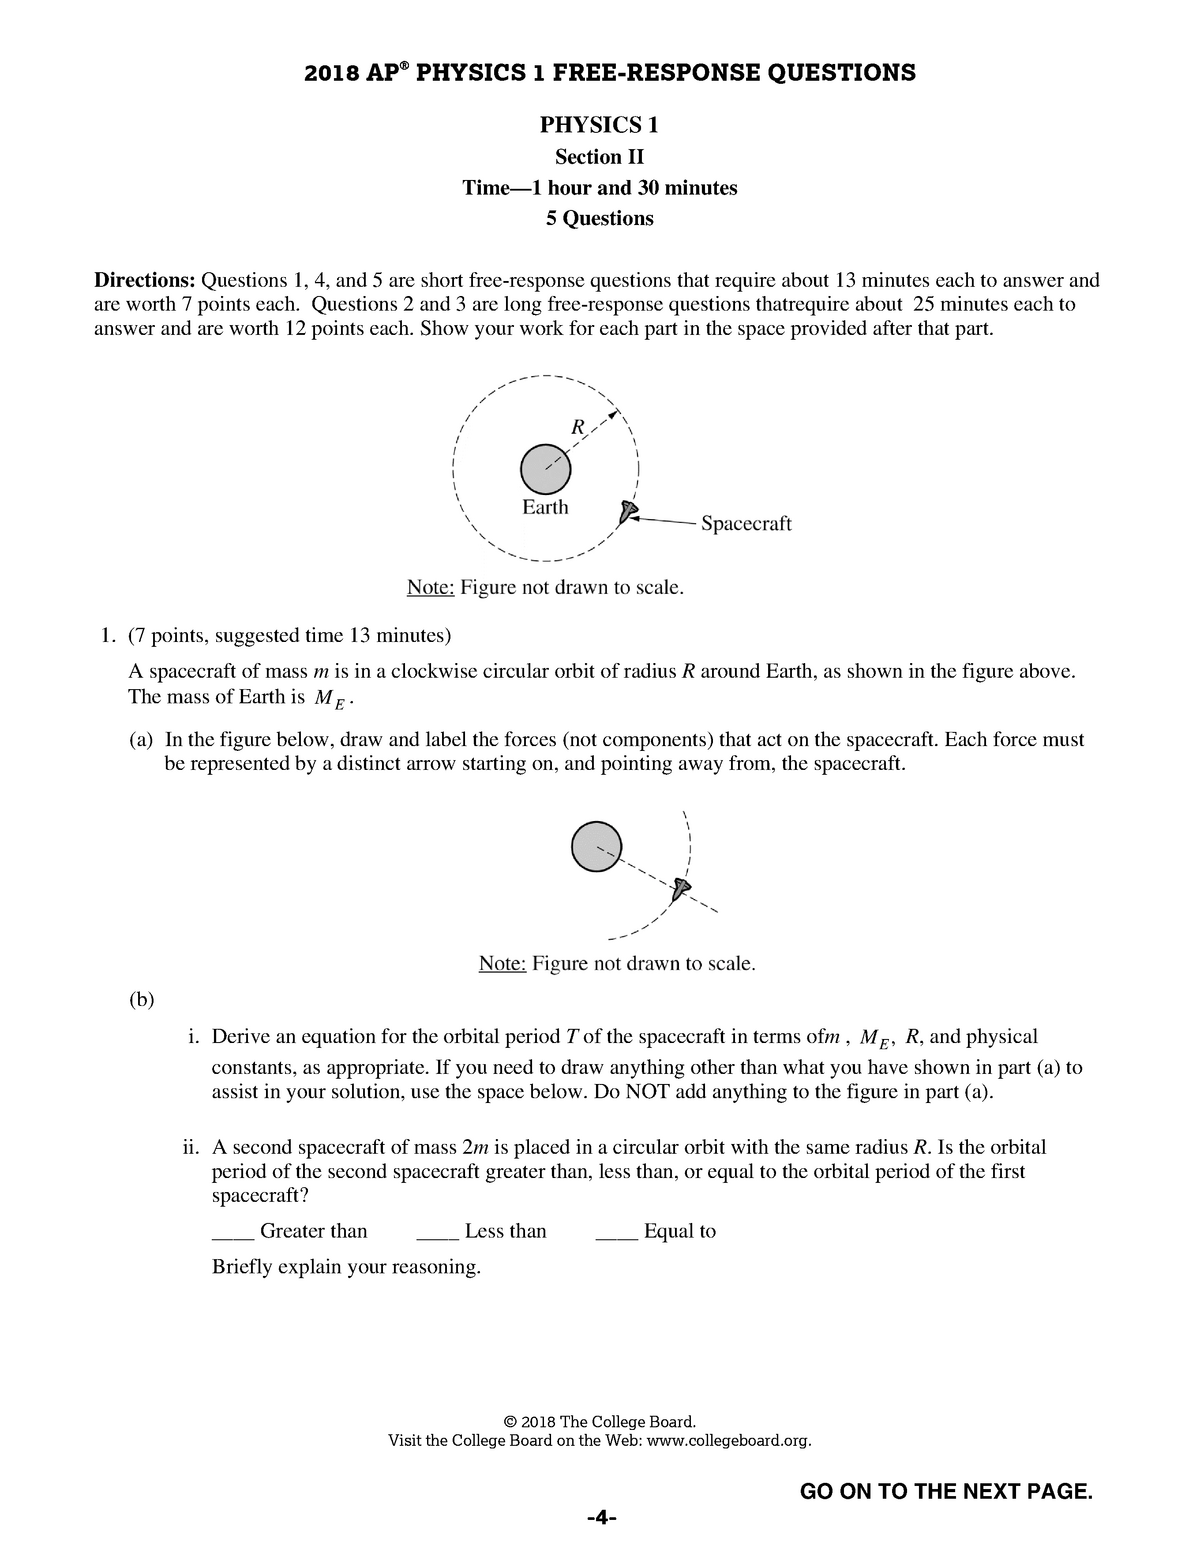 physics research questions for high school students